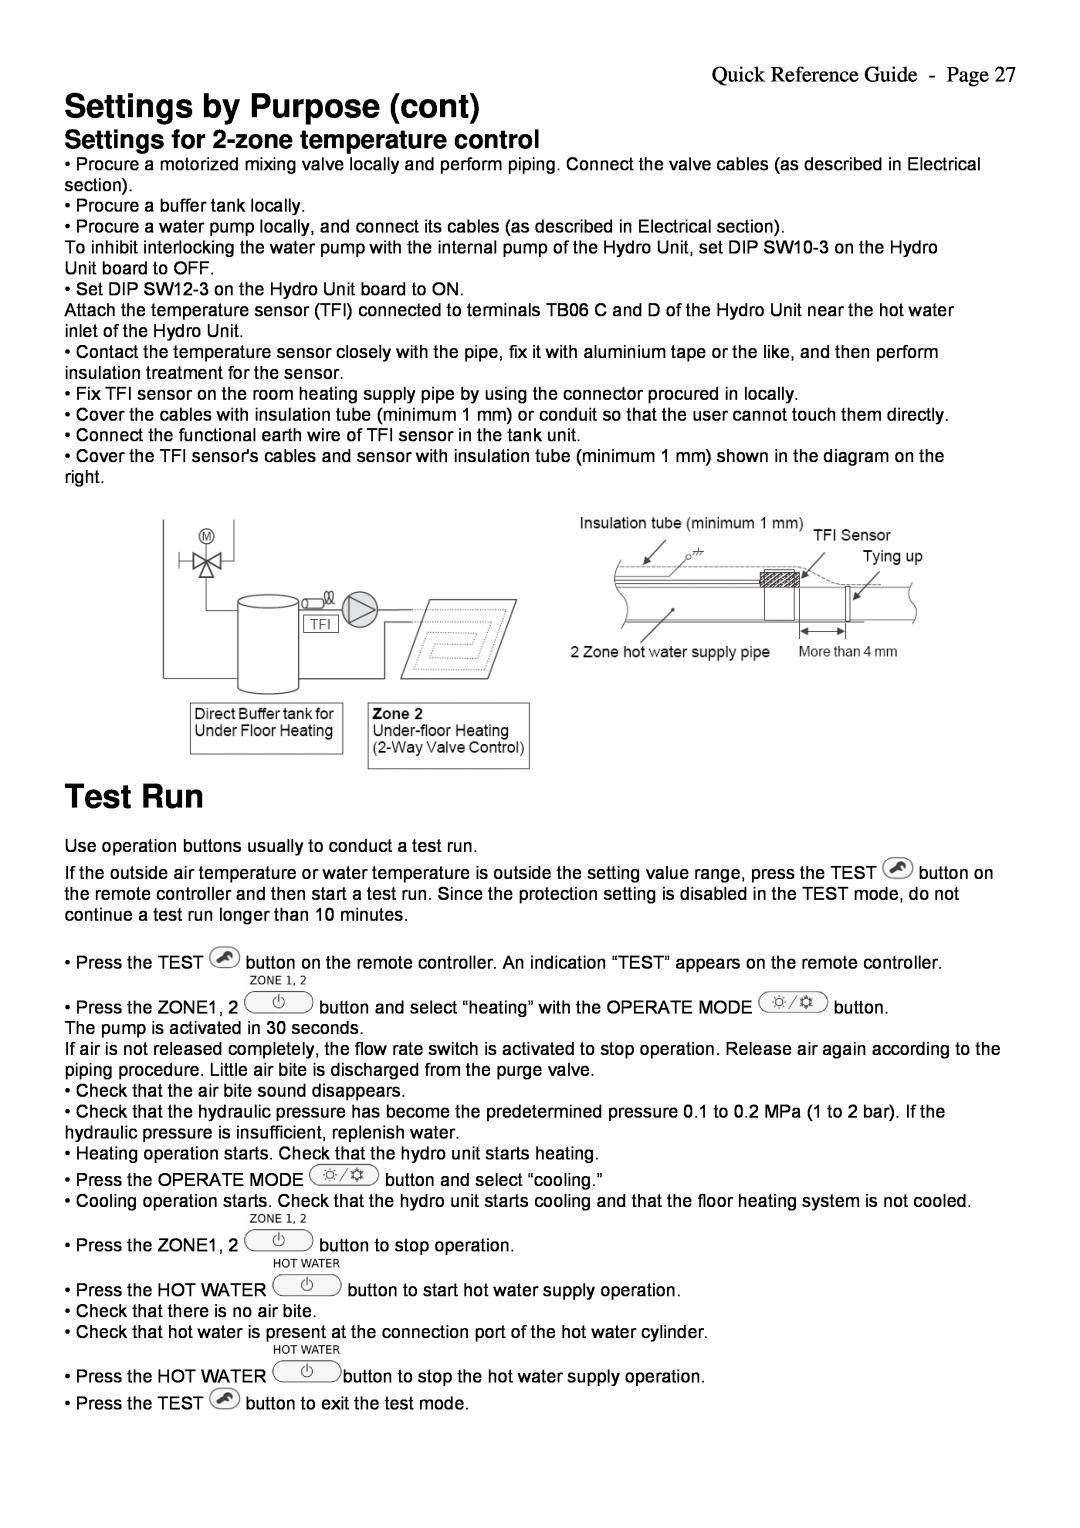 Toshiba A09-01P Settings by Purpose cont, Test Run, Settings for 2-zonetemperature control, Quick Reference Guide - Page 